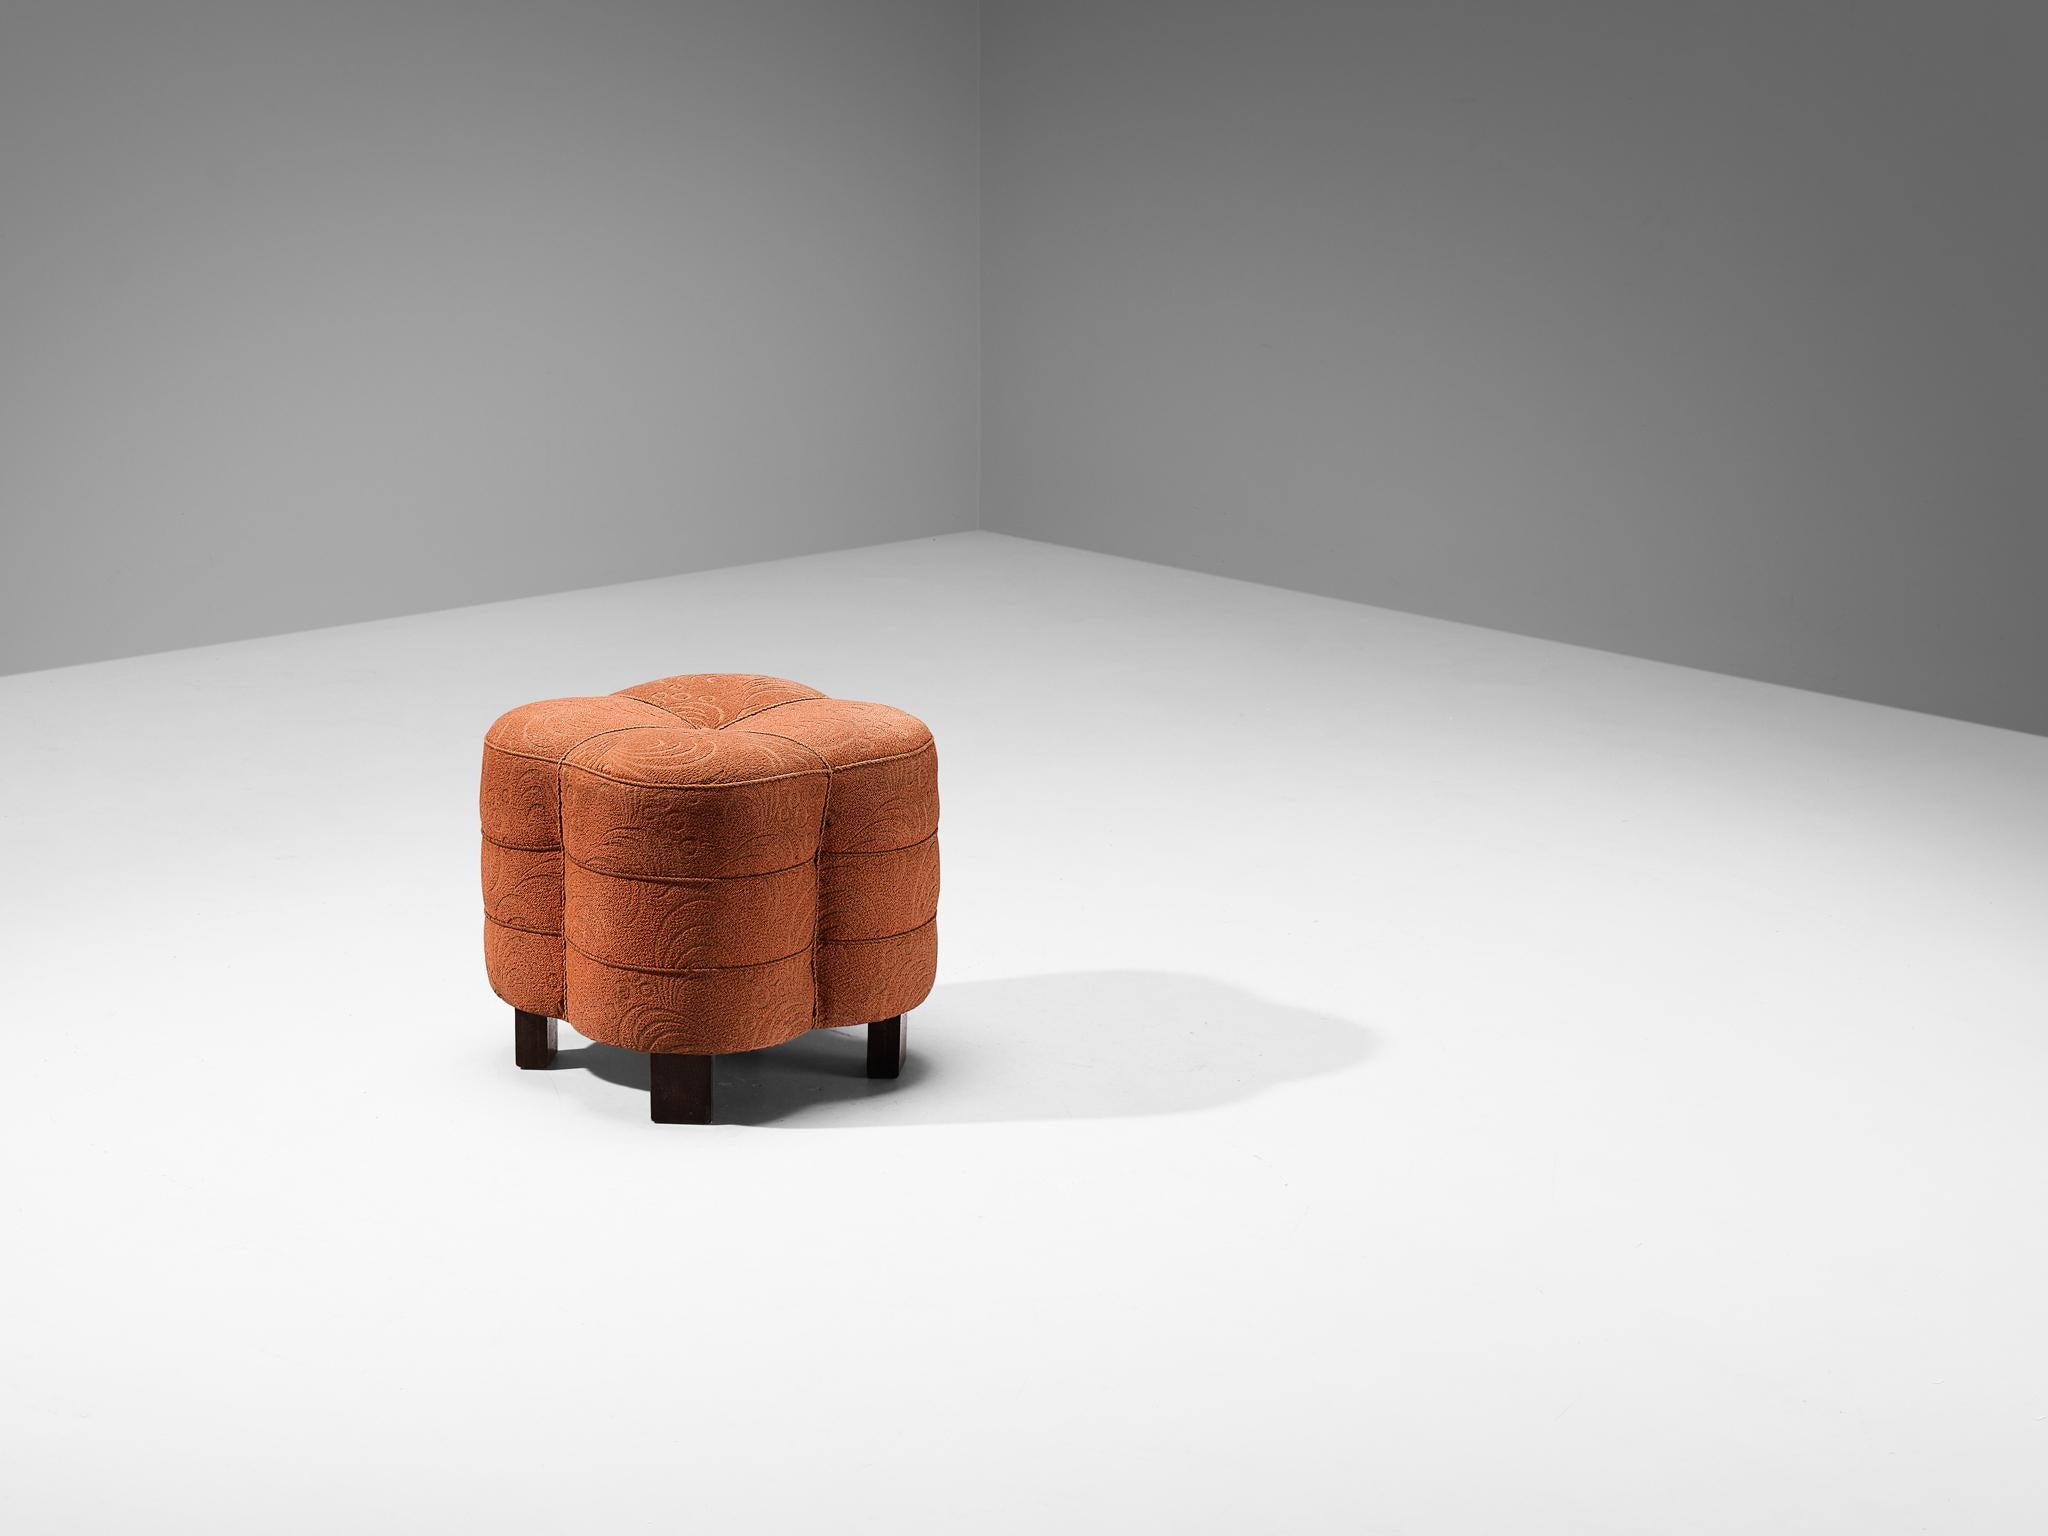 Jindrich Halabala for UP Závody, footstool, tabouret, ottoman, fabric, wood, Czech Republic, 1930s.

This poetic pouf is designed in the 1930s when the Art Deco Period was at its highest point and distinguishes itself by means of artistic